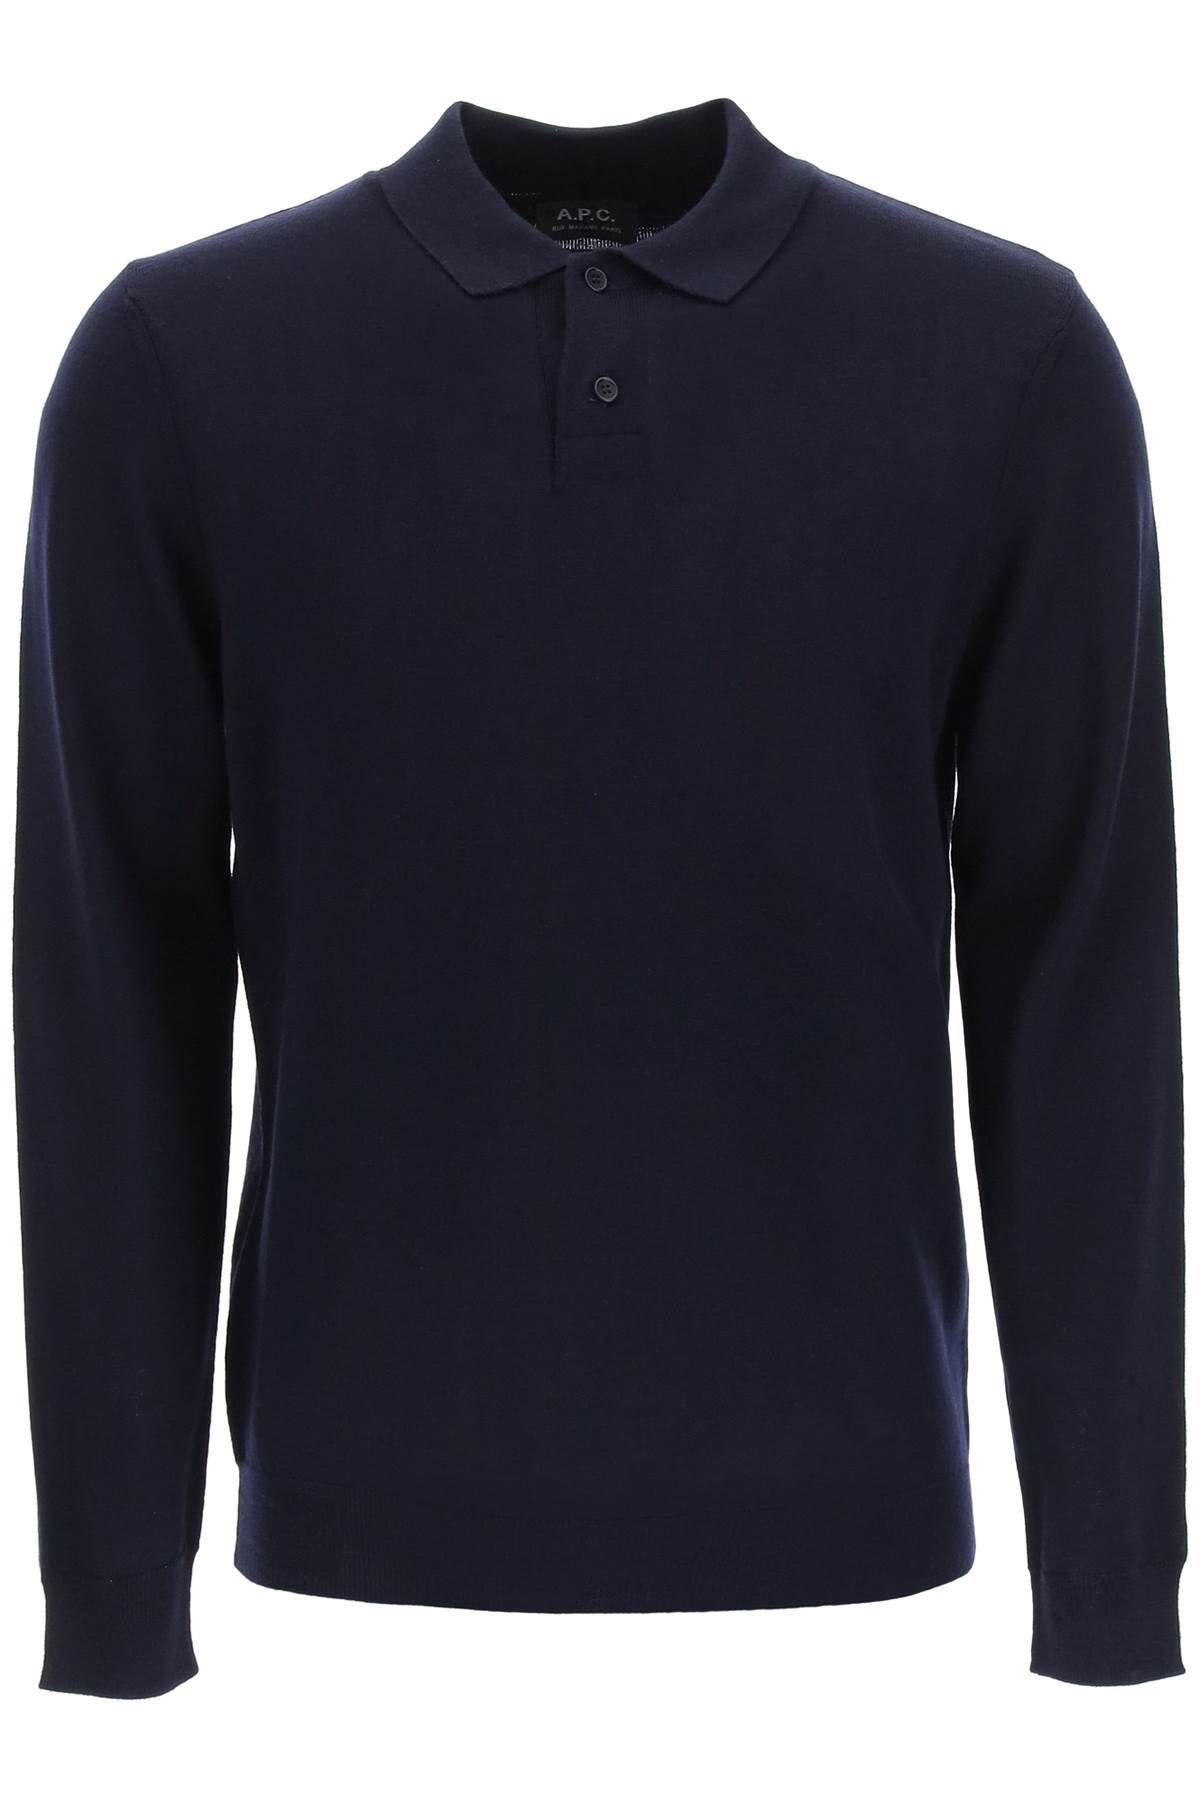 A.P.C. Jerry Wool Polo Shirt